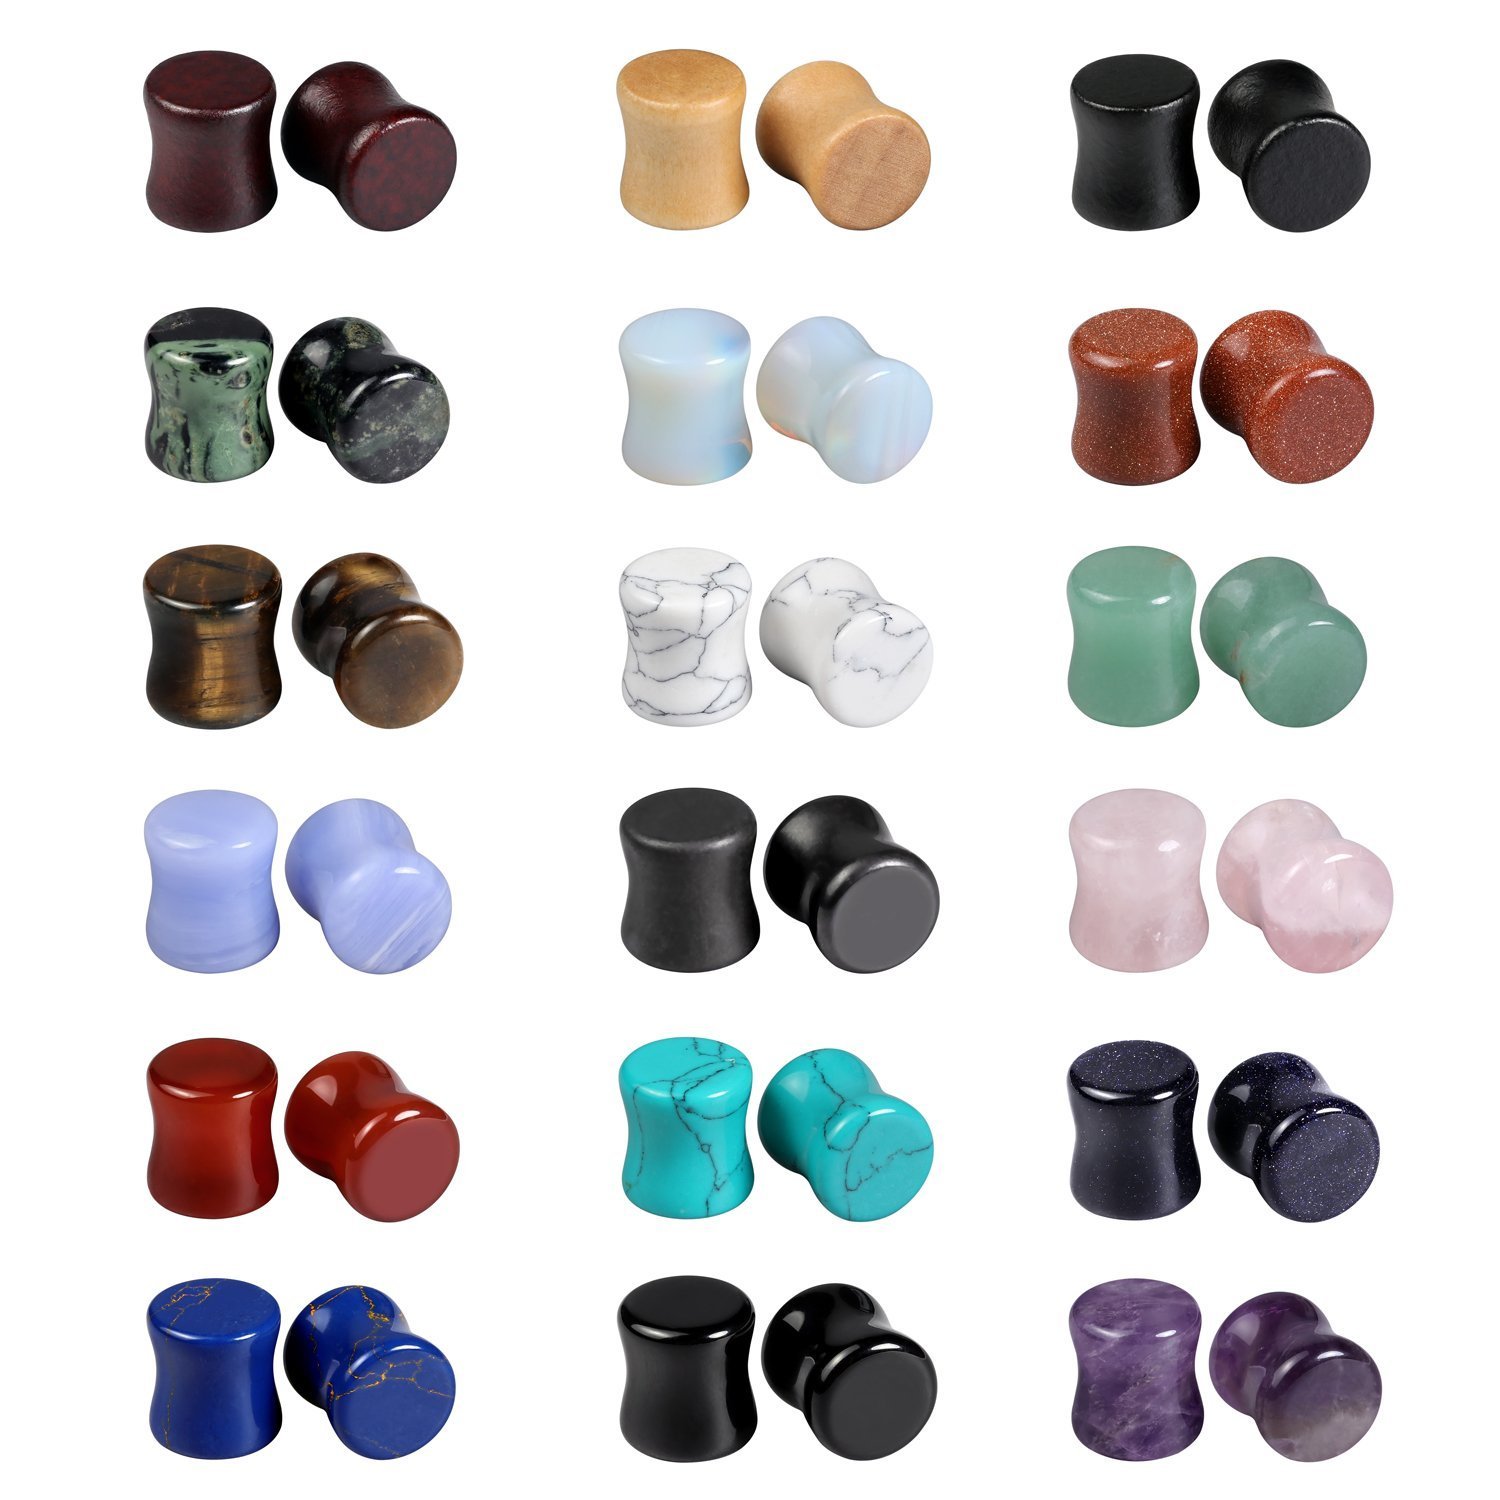 Evevil Wood Mixed Stone Ear Plugs Ear Gauges Double Flared Saddle Stretching Gauge Expander (18 Pairs/36 Pieces,00g-14mm)